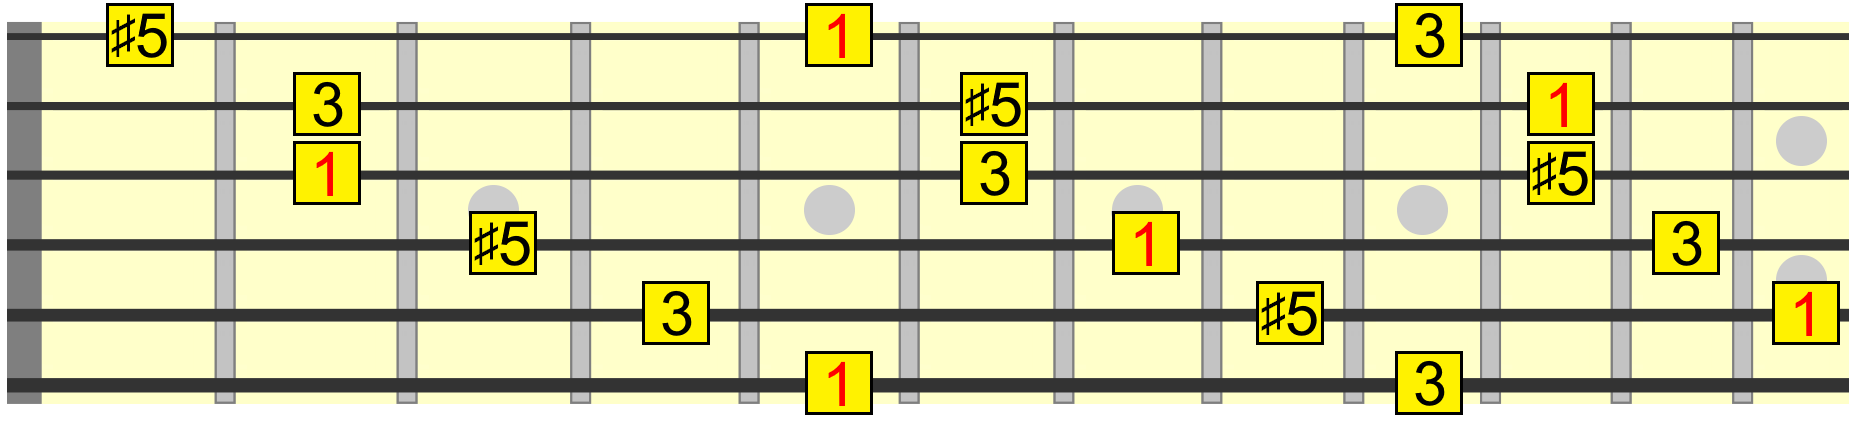 Augmented Guitar Chords Everything You Need To Know